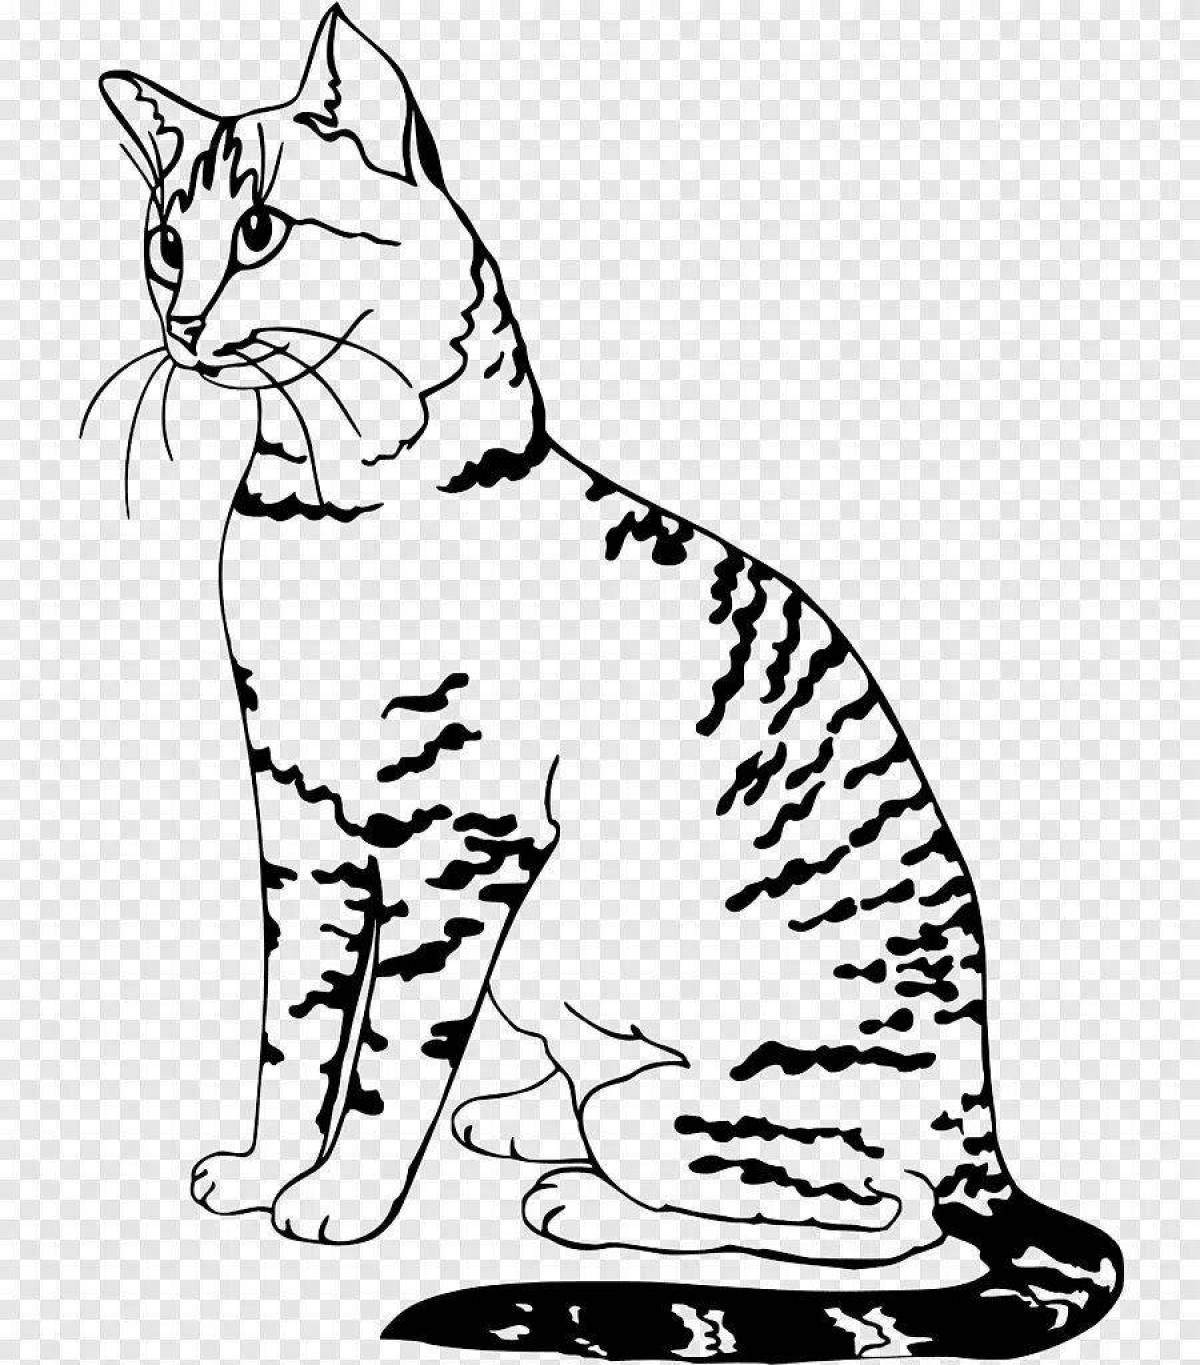 Colouring friendly tabby cat